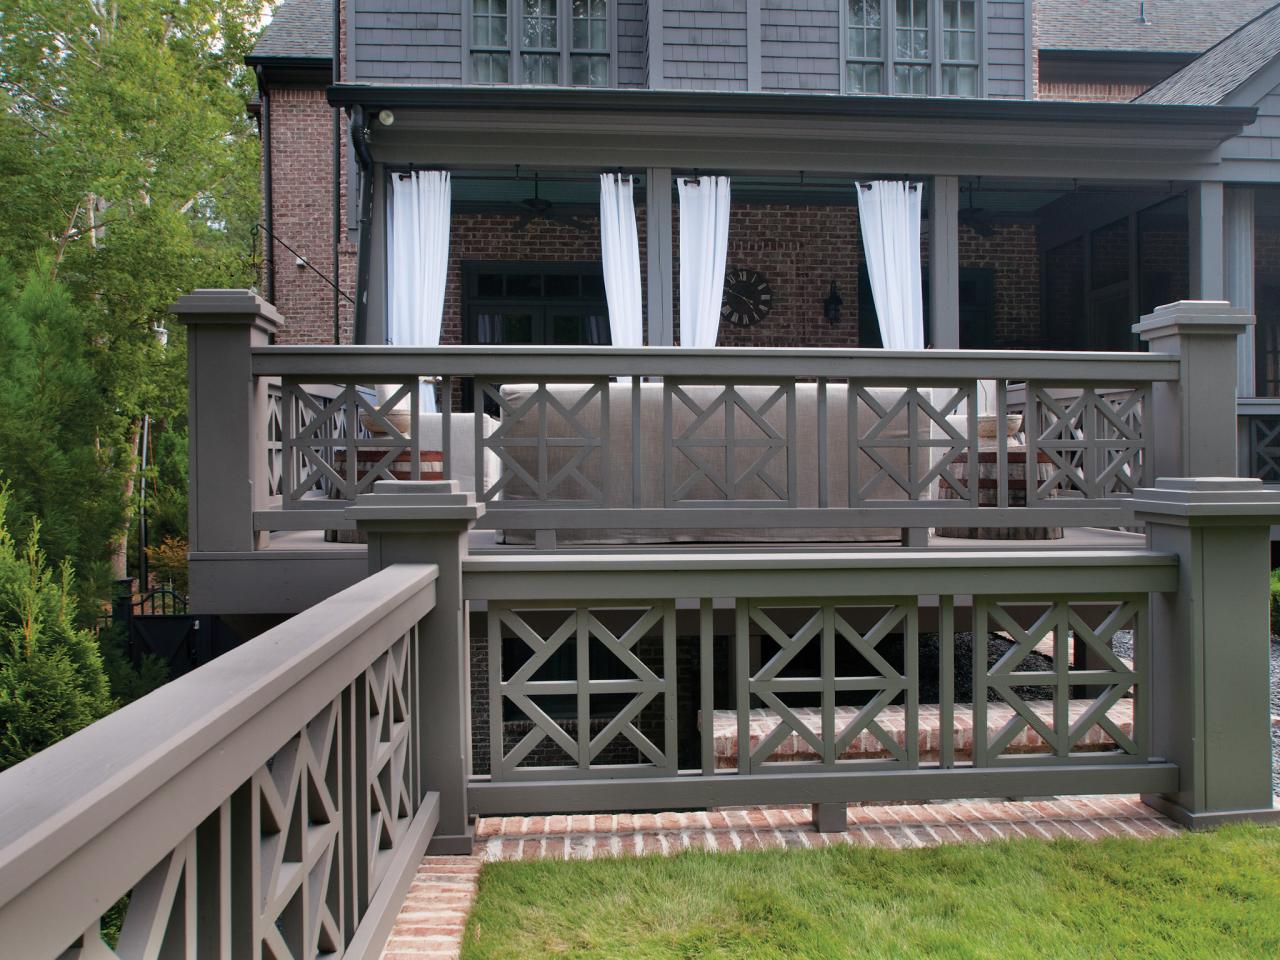 Outdoor Stair Railing Ideas to Inspire You